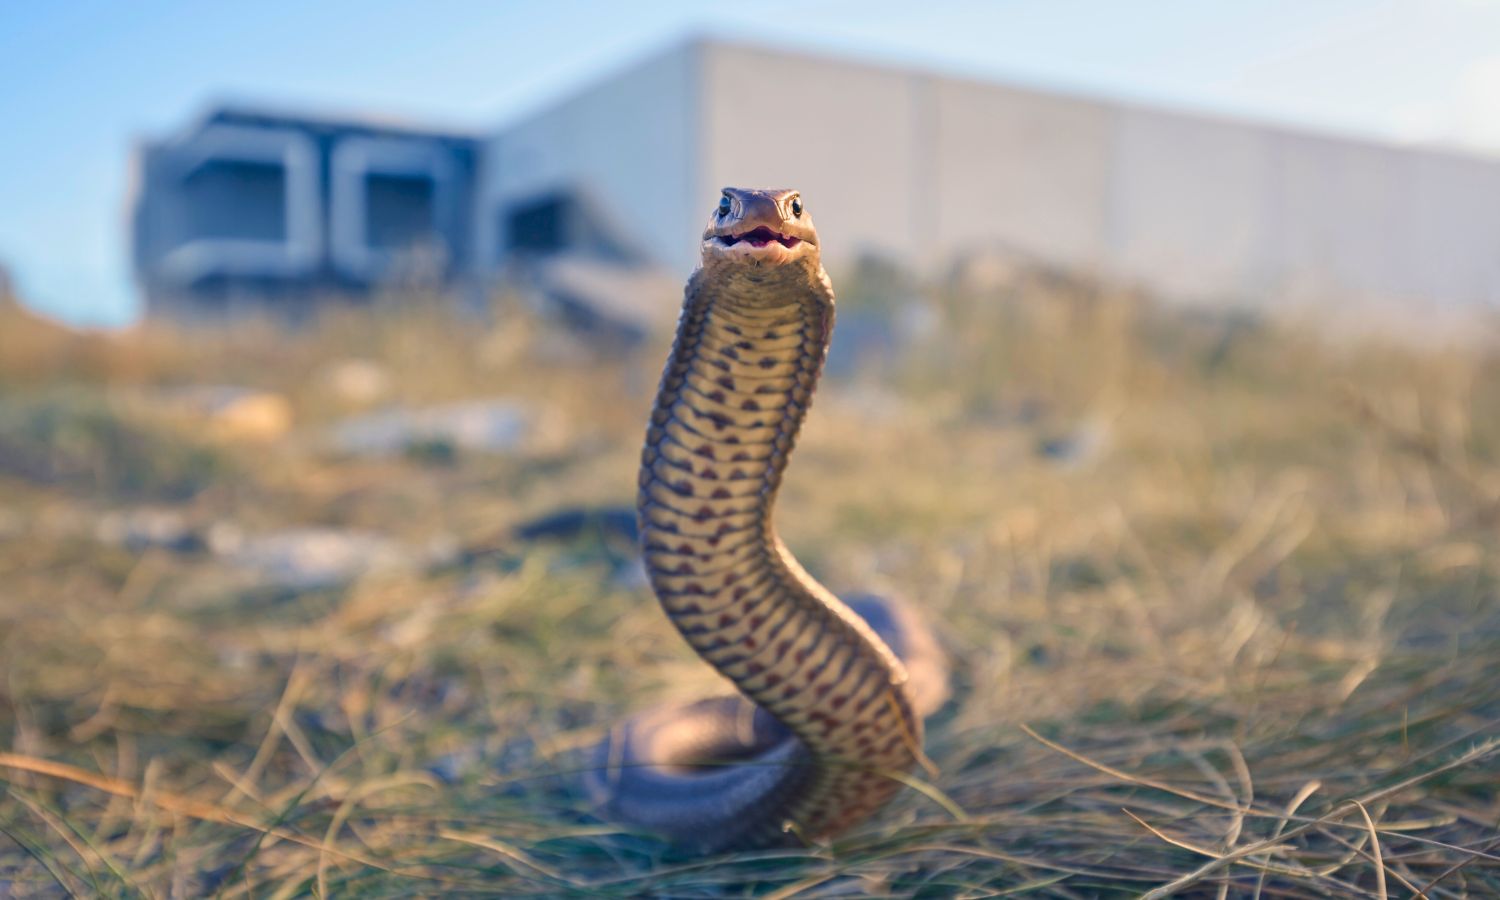 An image of a brown snake in Australia